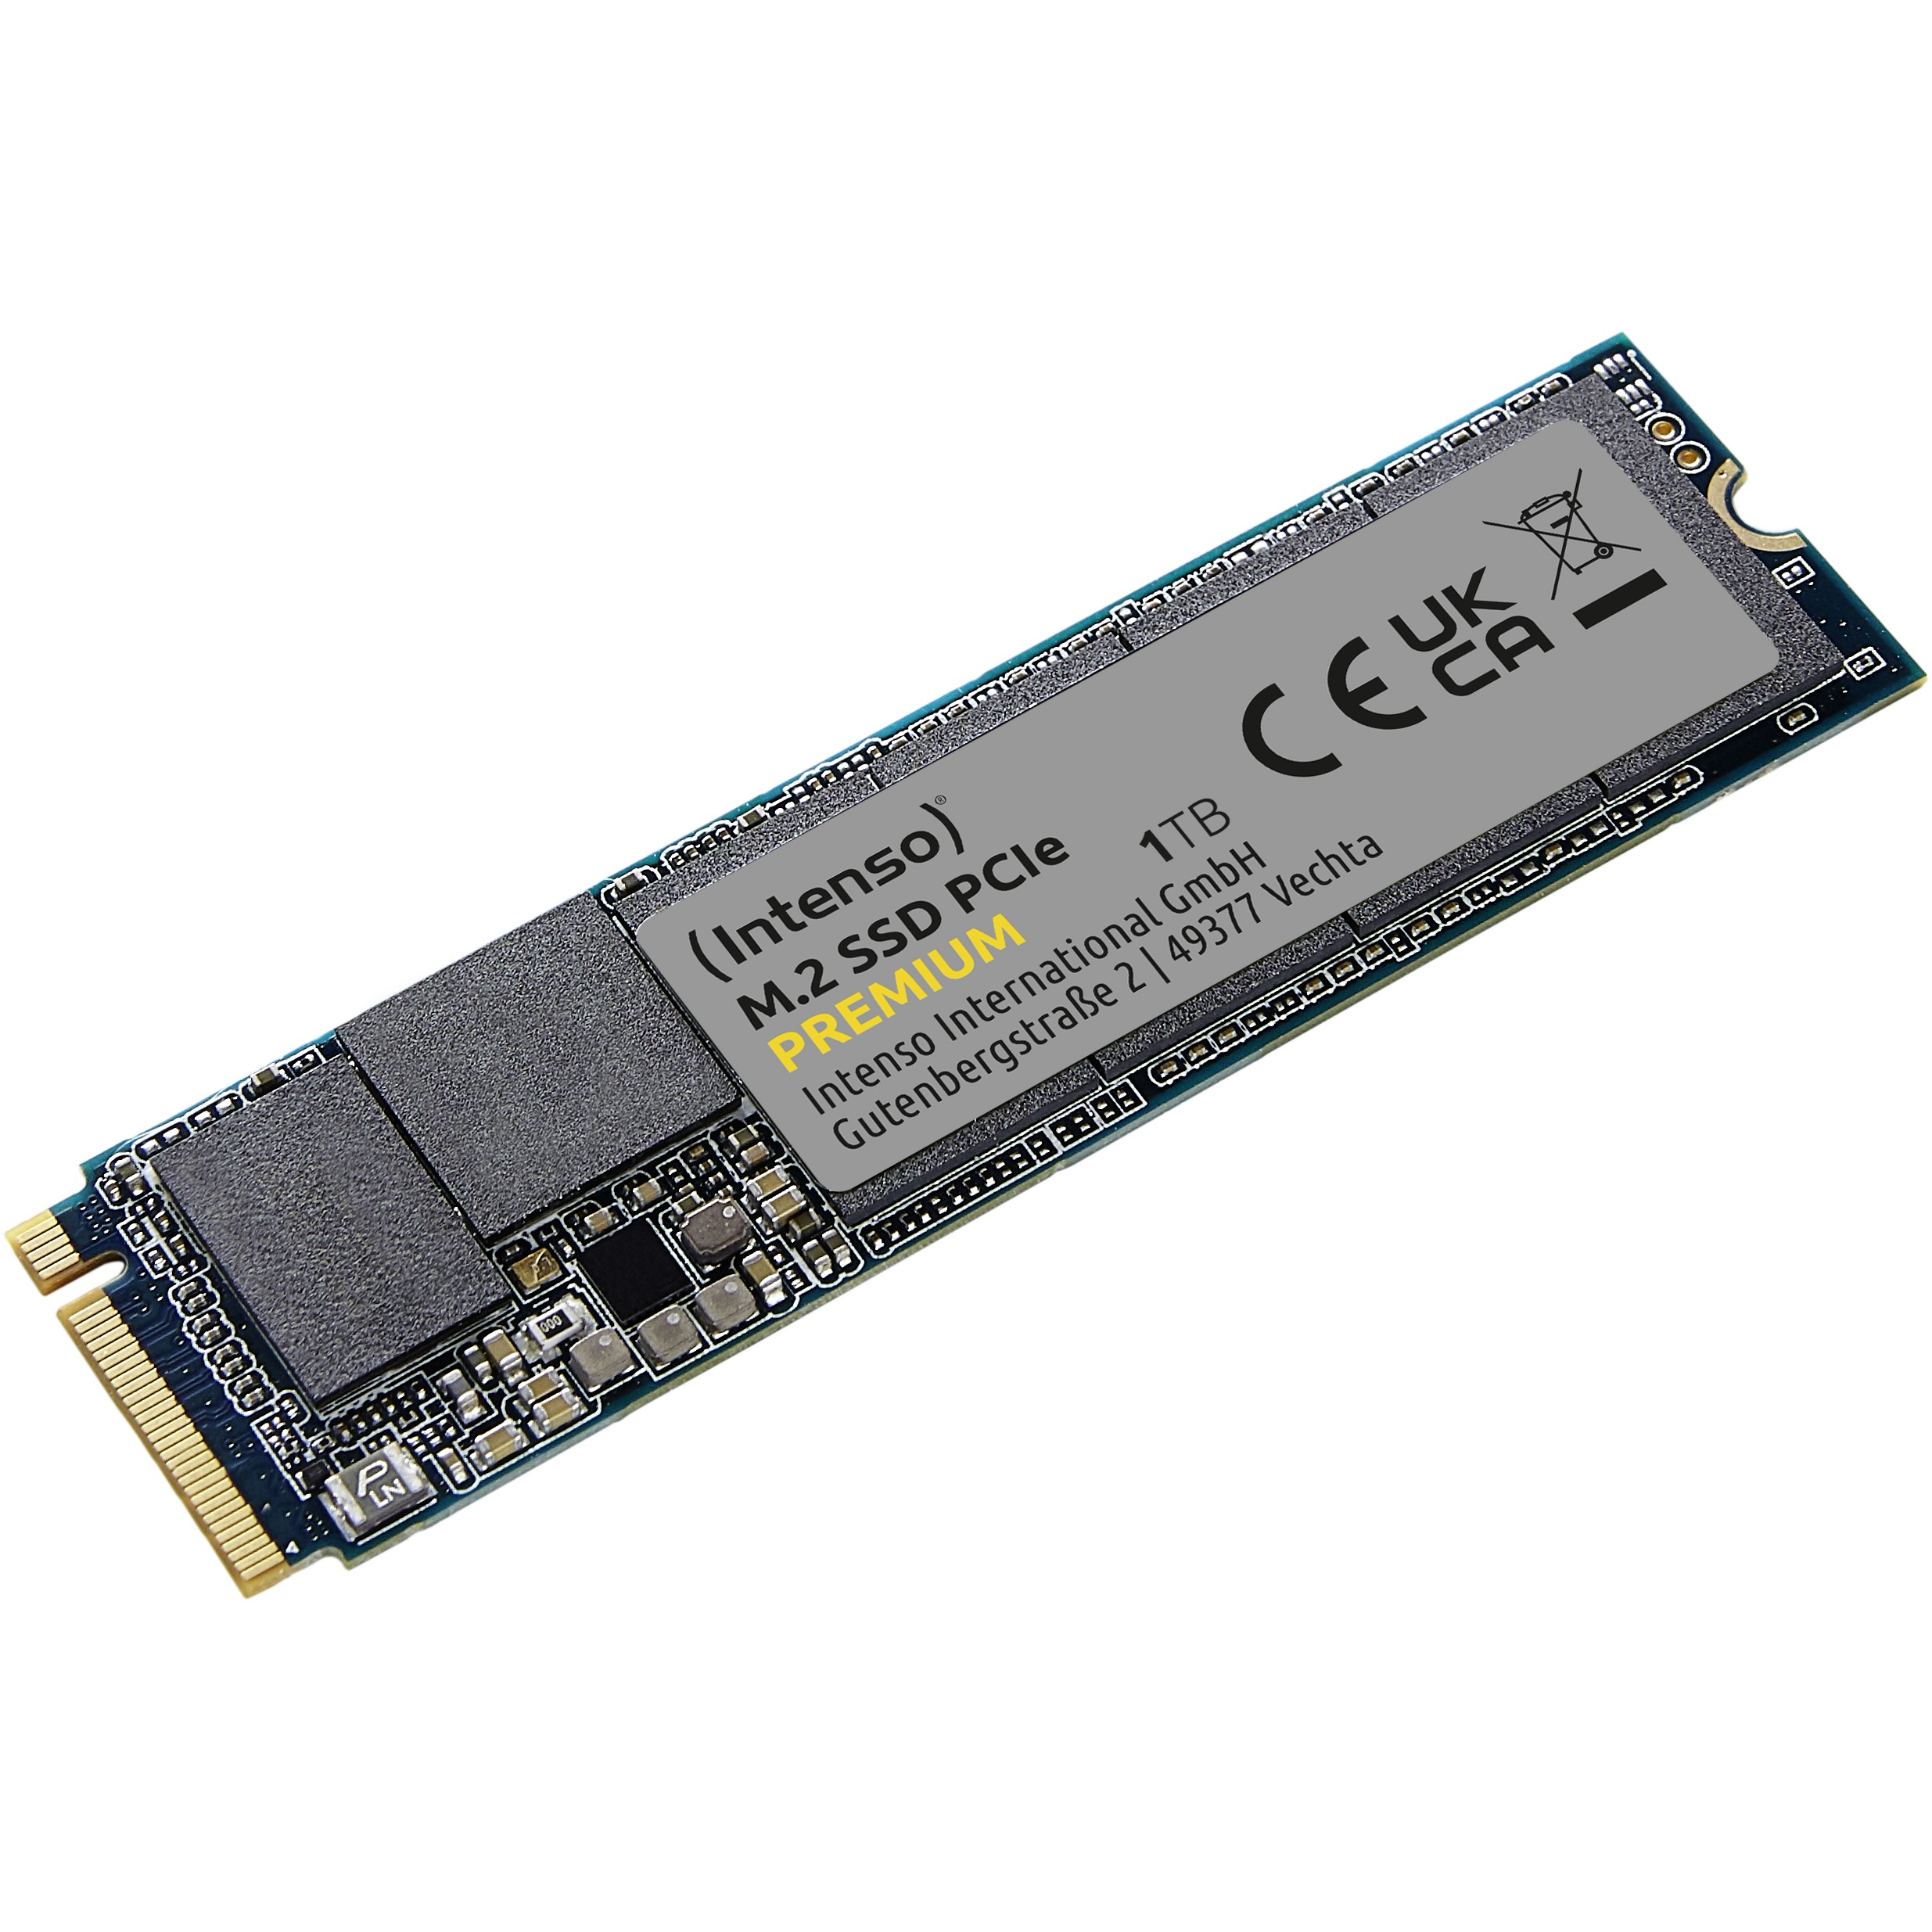 Intenso 3835460 internal solid state drive